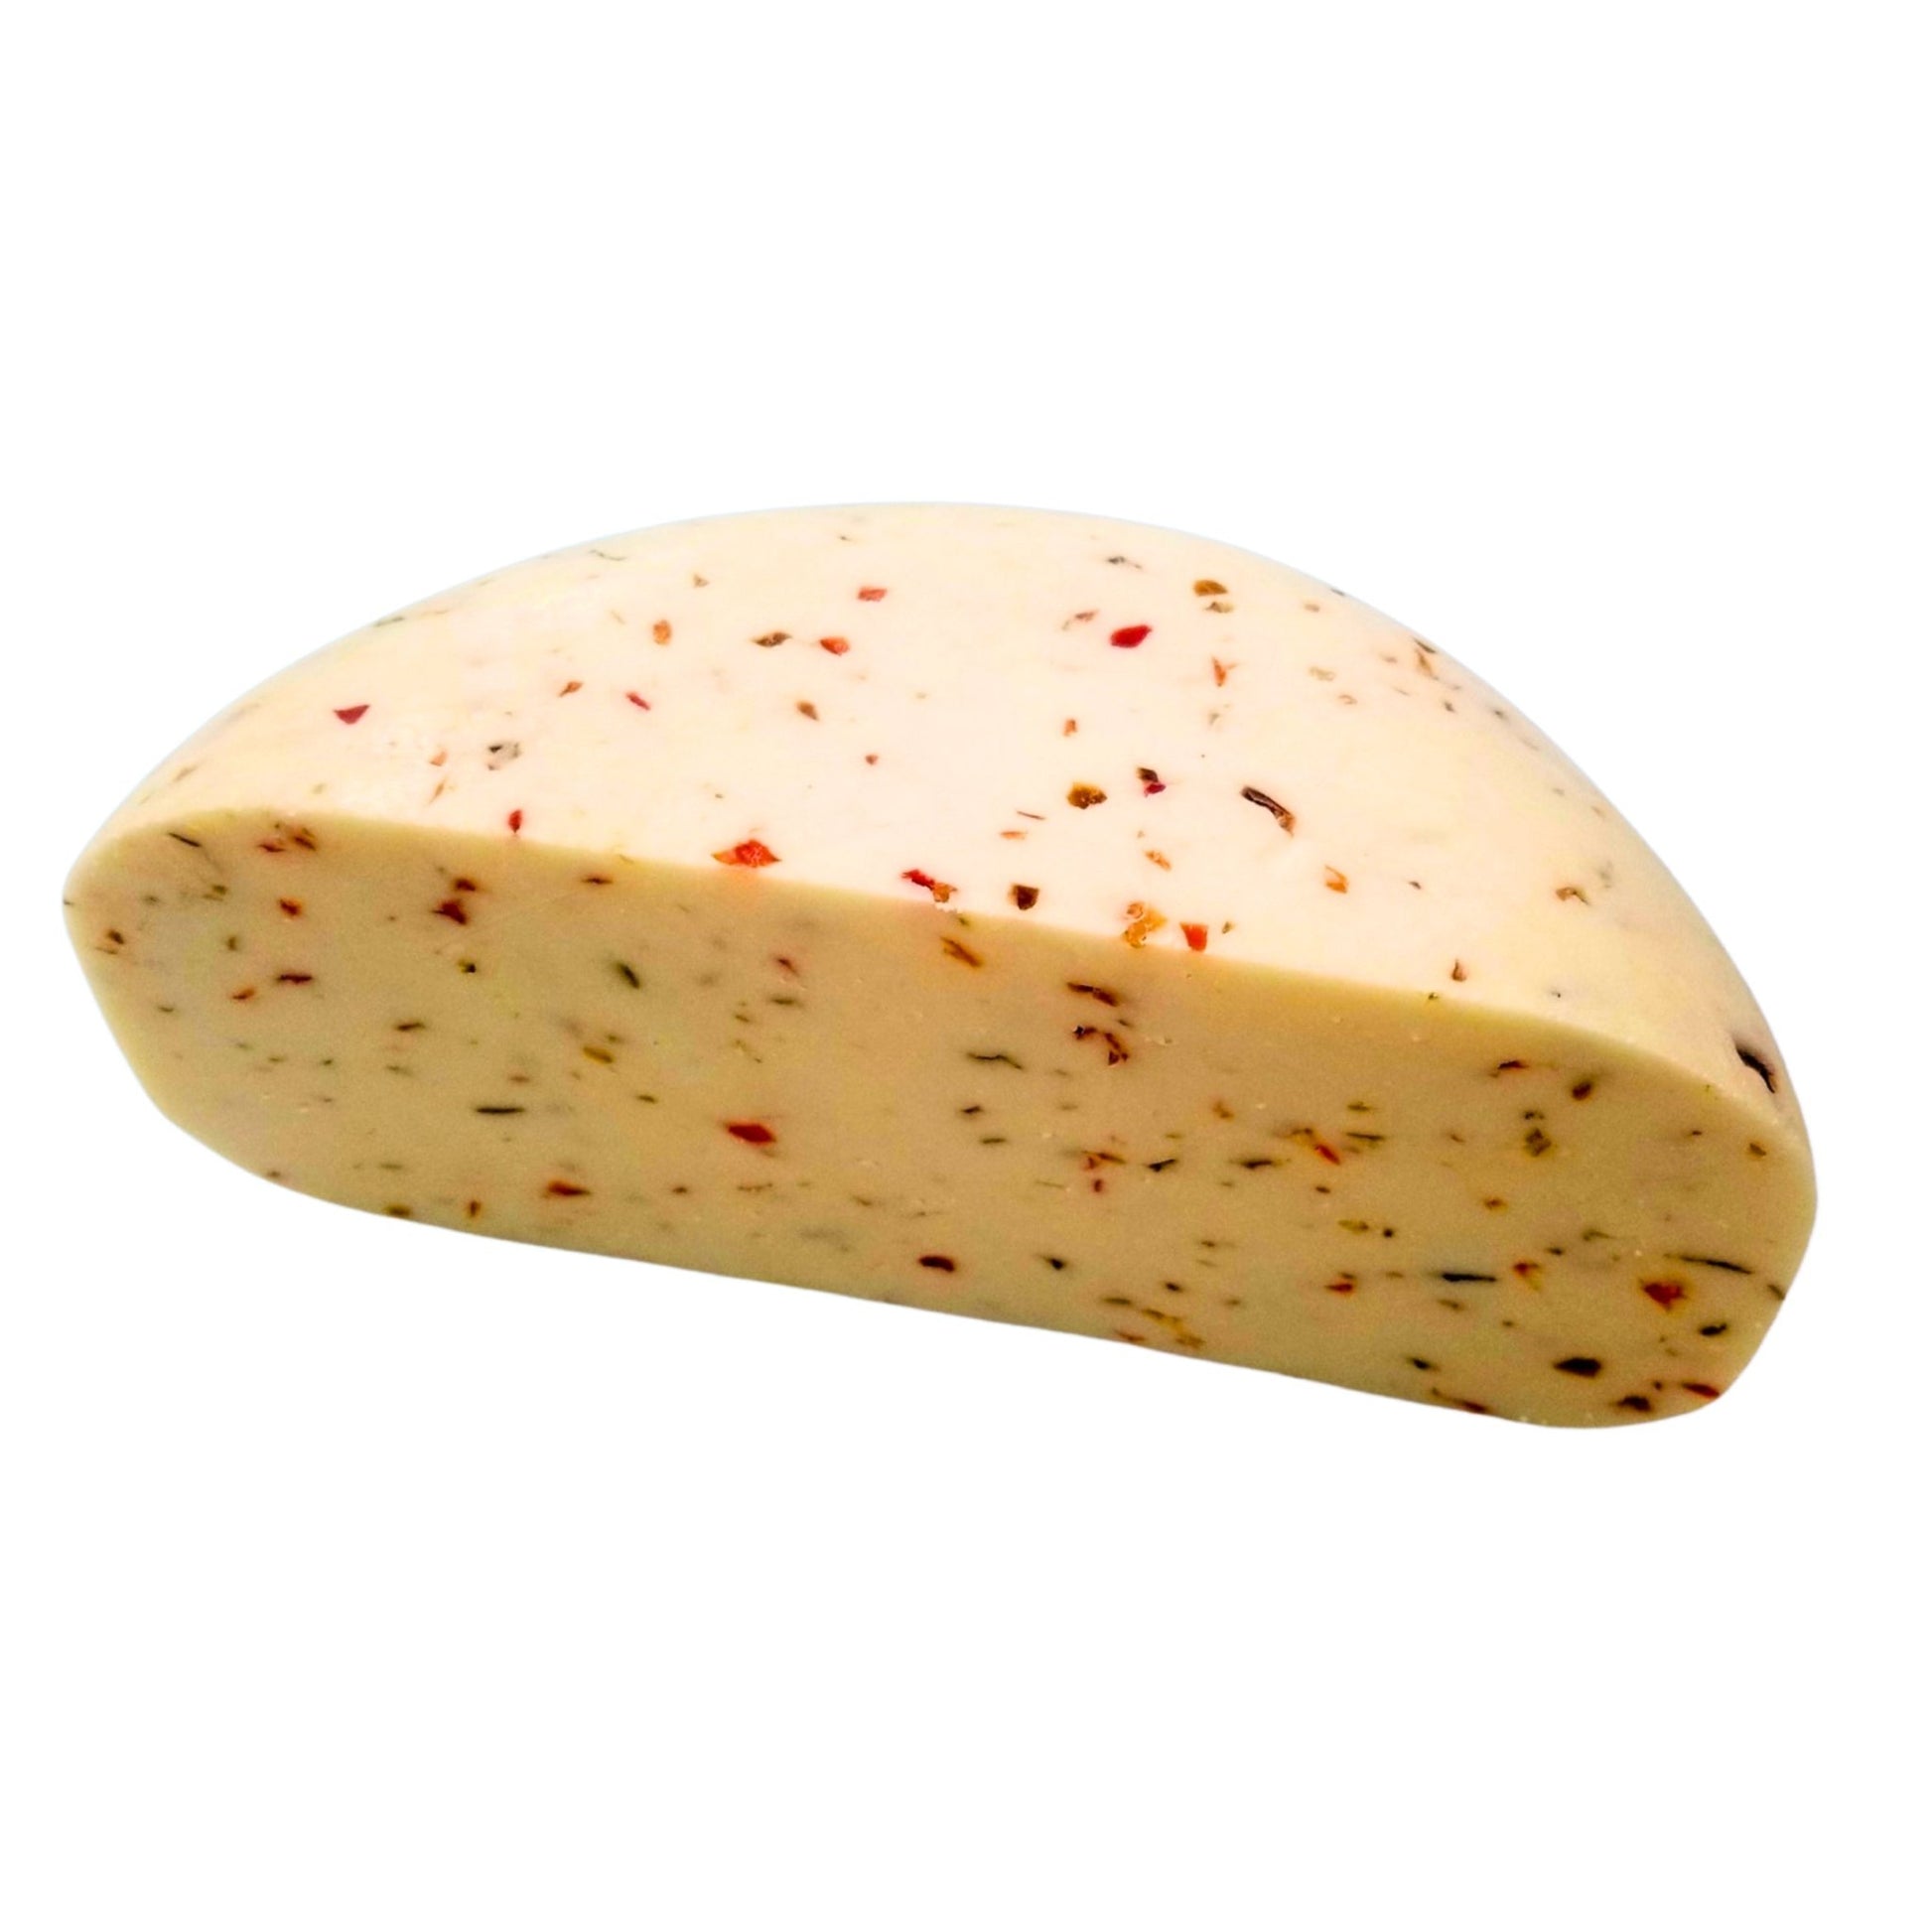 Eichtens Habanero Pepper Gouda Cheese - Eichtens Cheeses, Gifts & FoodsAll Products